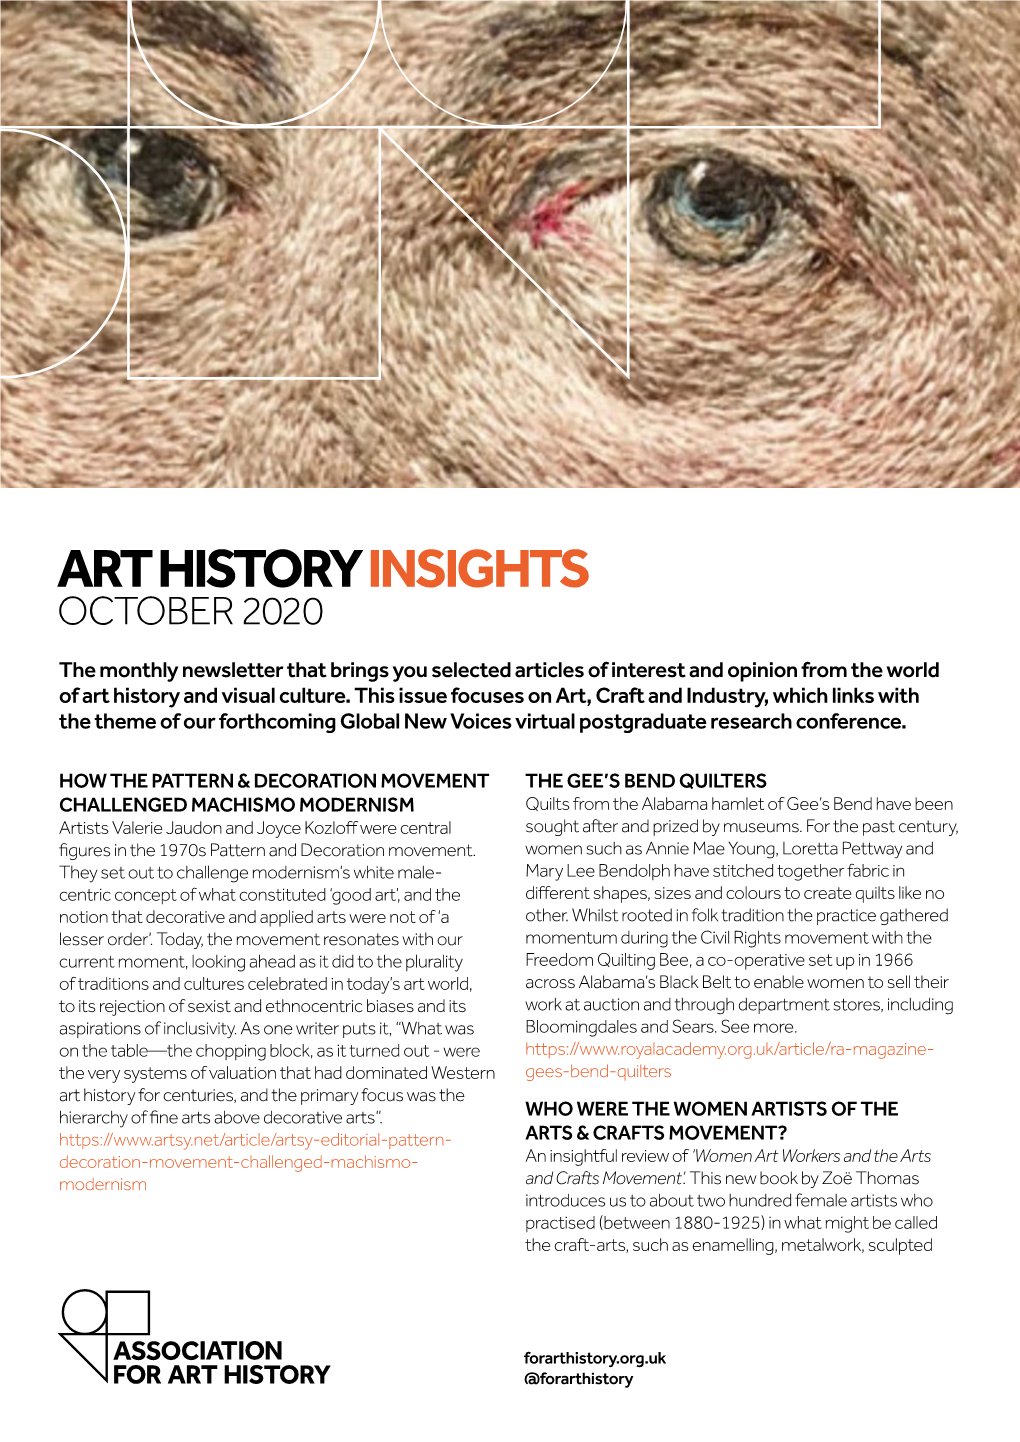 ART HISTORY INSIGHTS OCTOBER 2020 the Monthly Newsletter That Brings You Selected Articles of Interest and Opinion from the World of Art History and Visual Culture